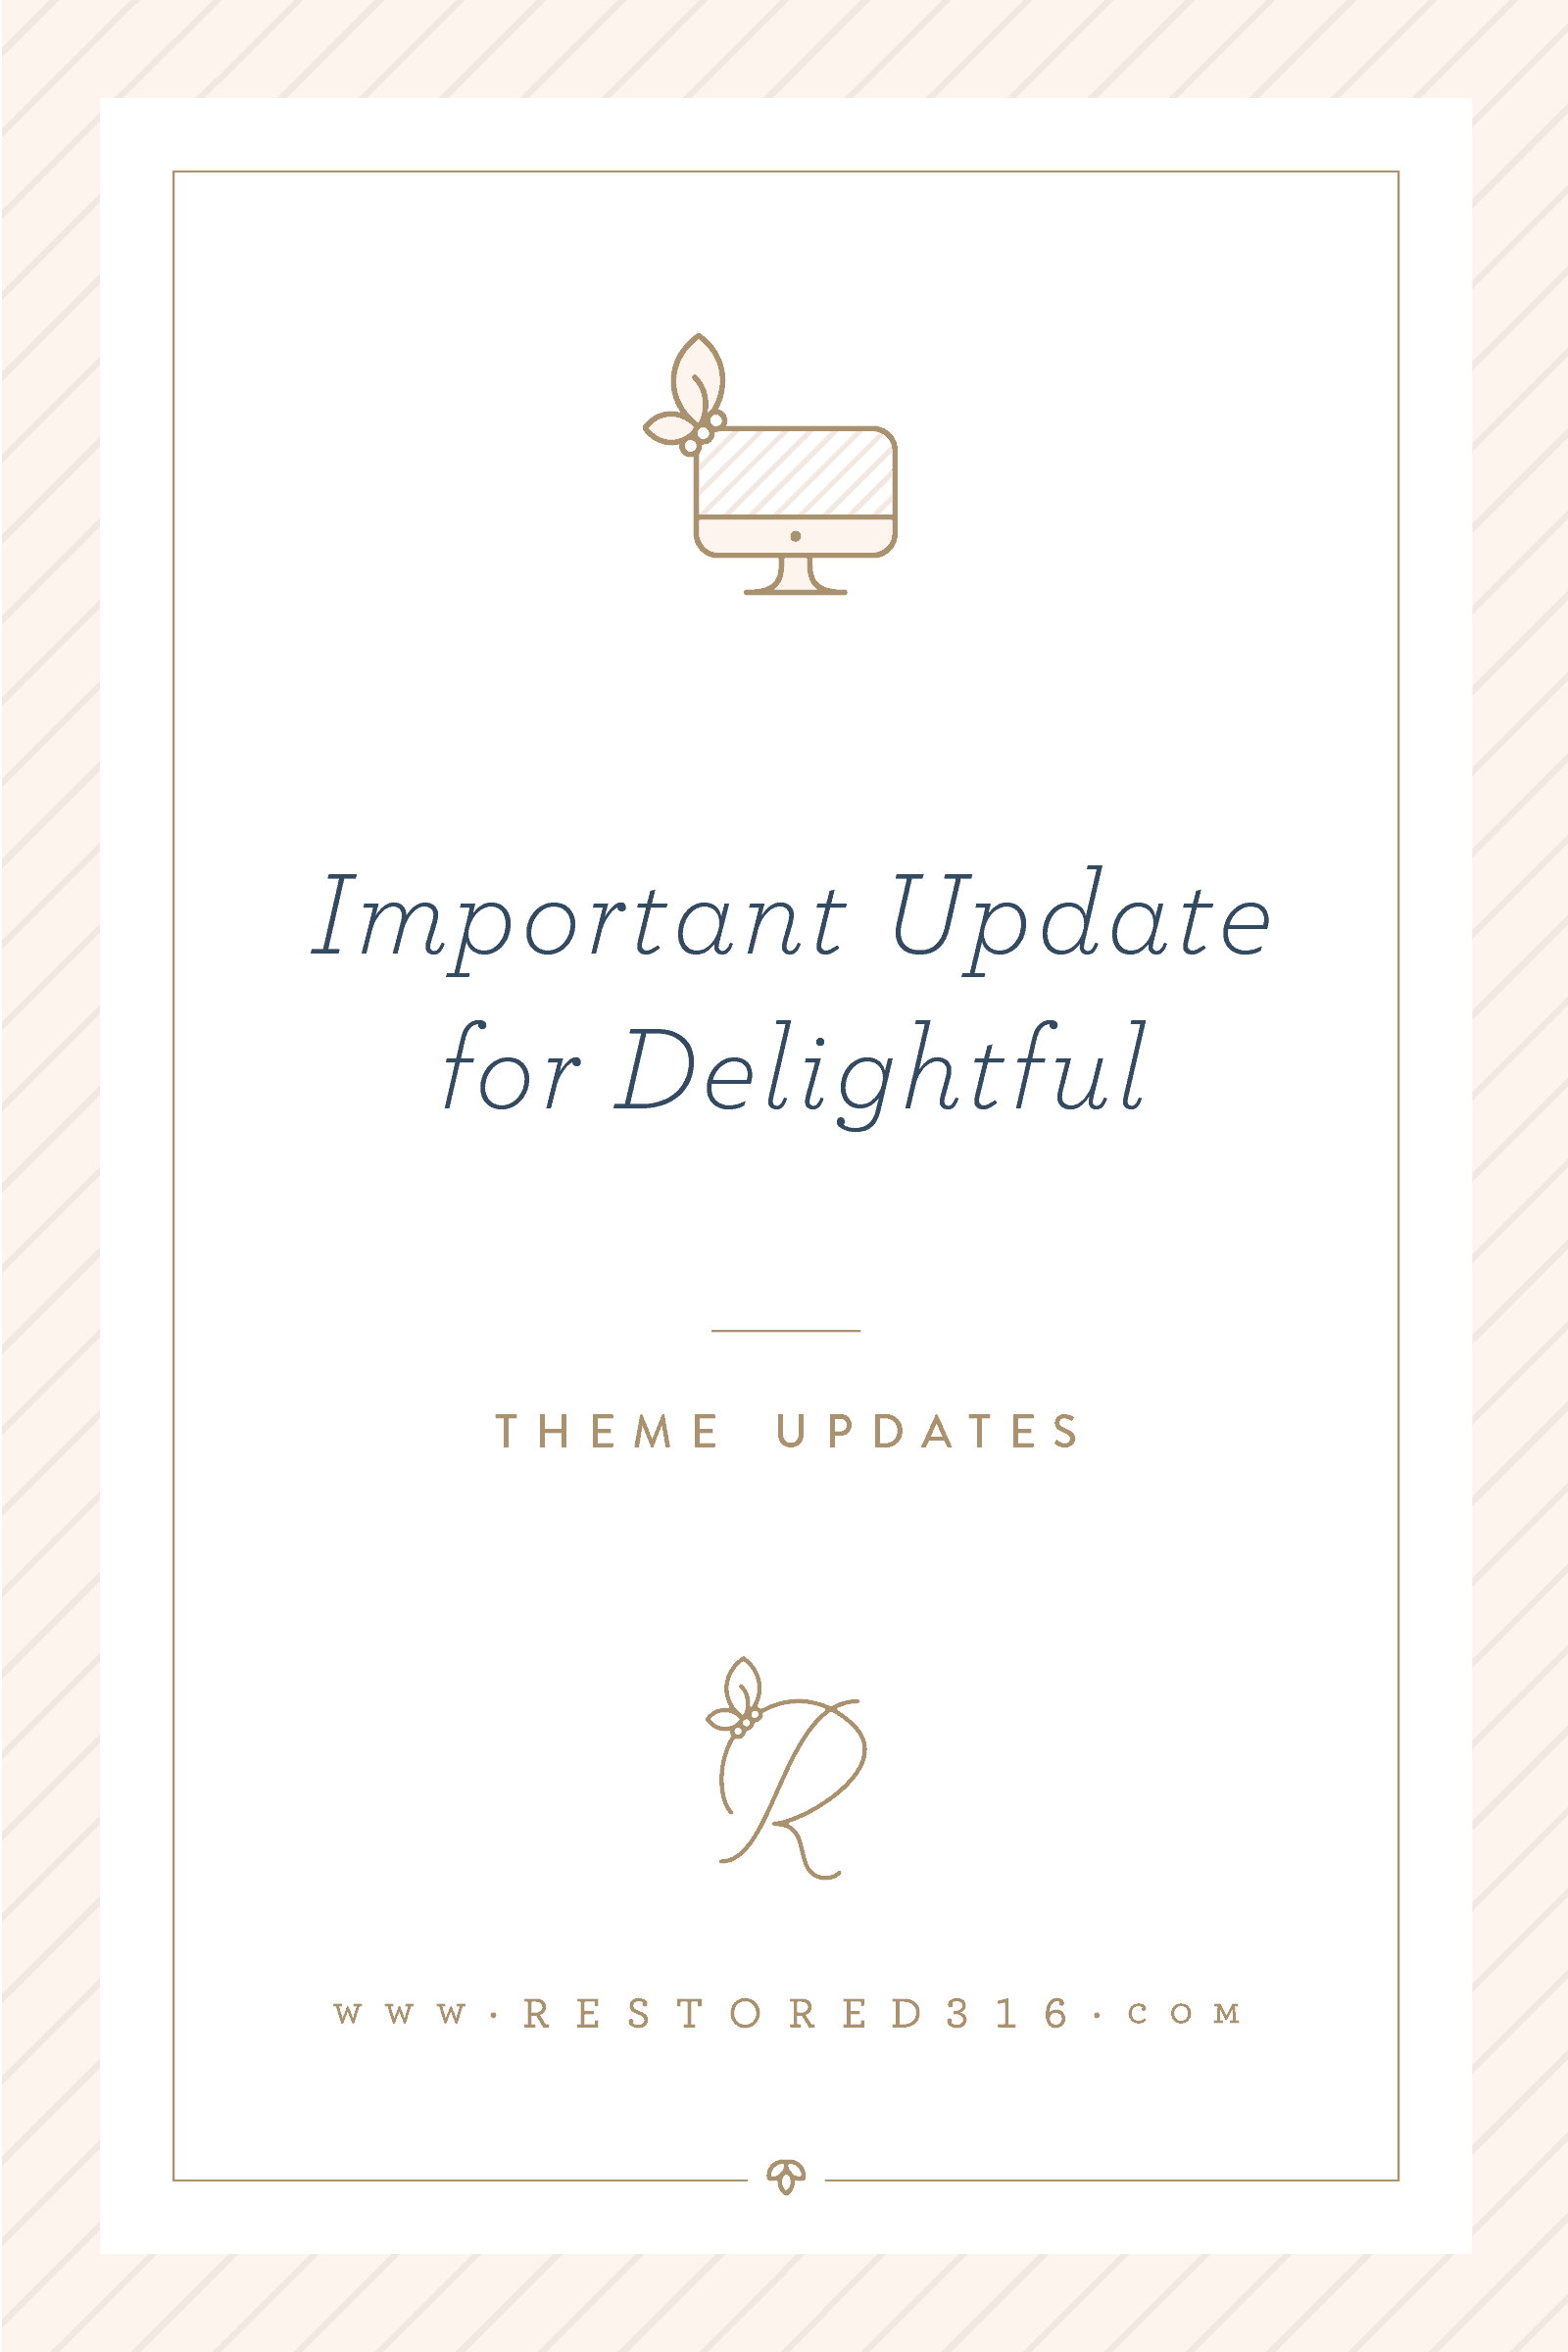 Important update for Delightful